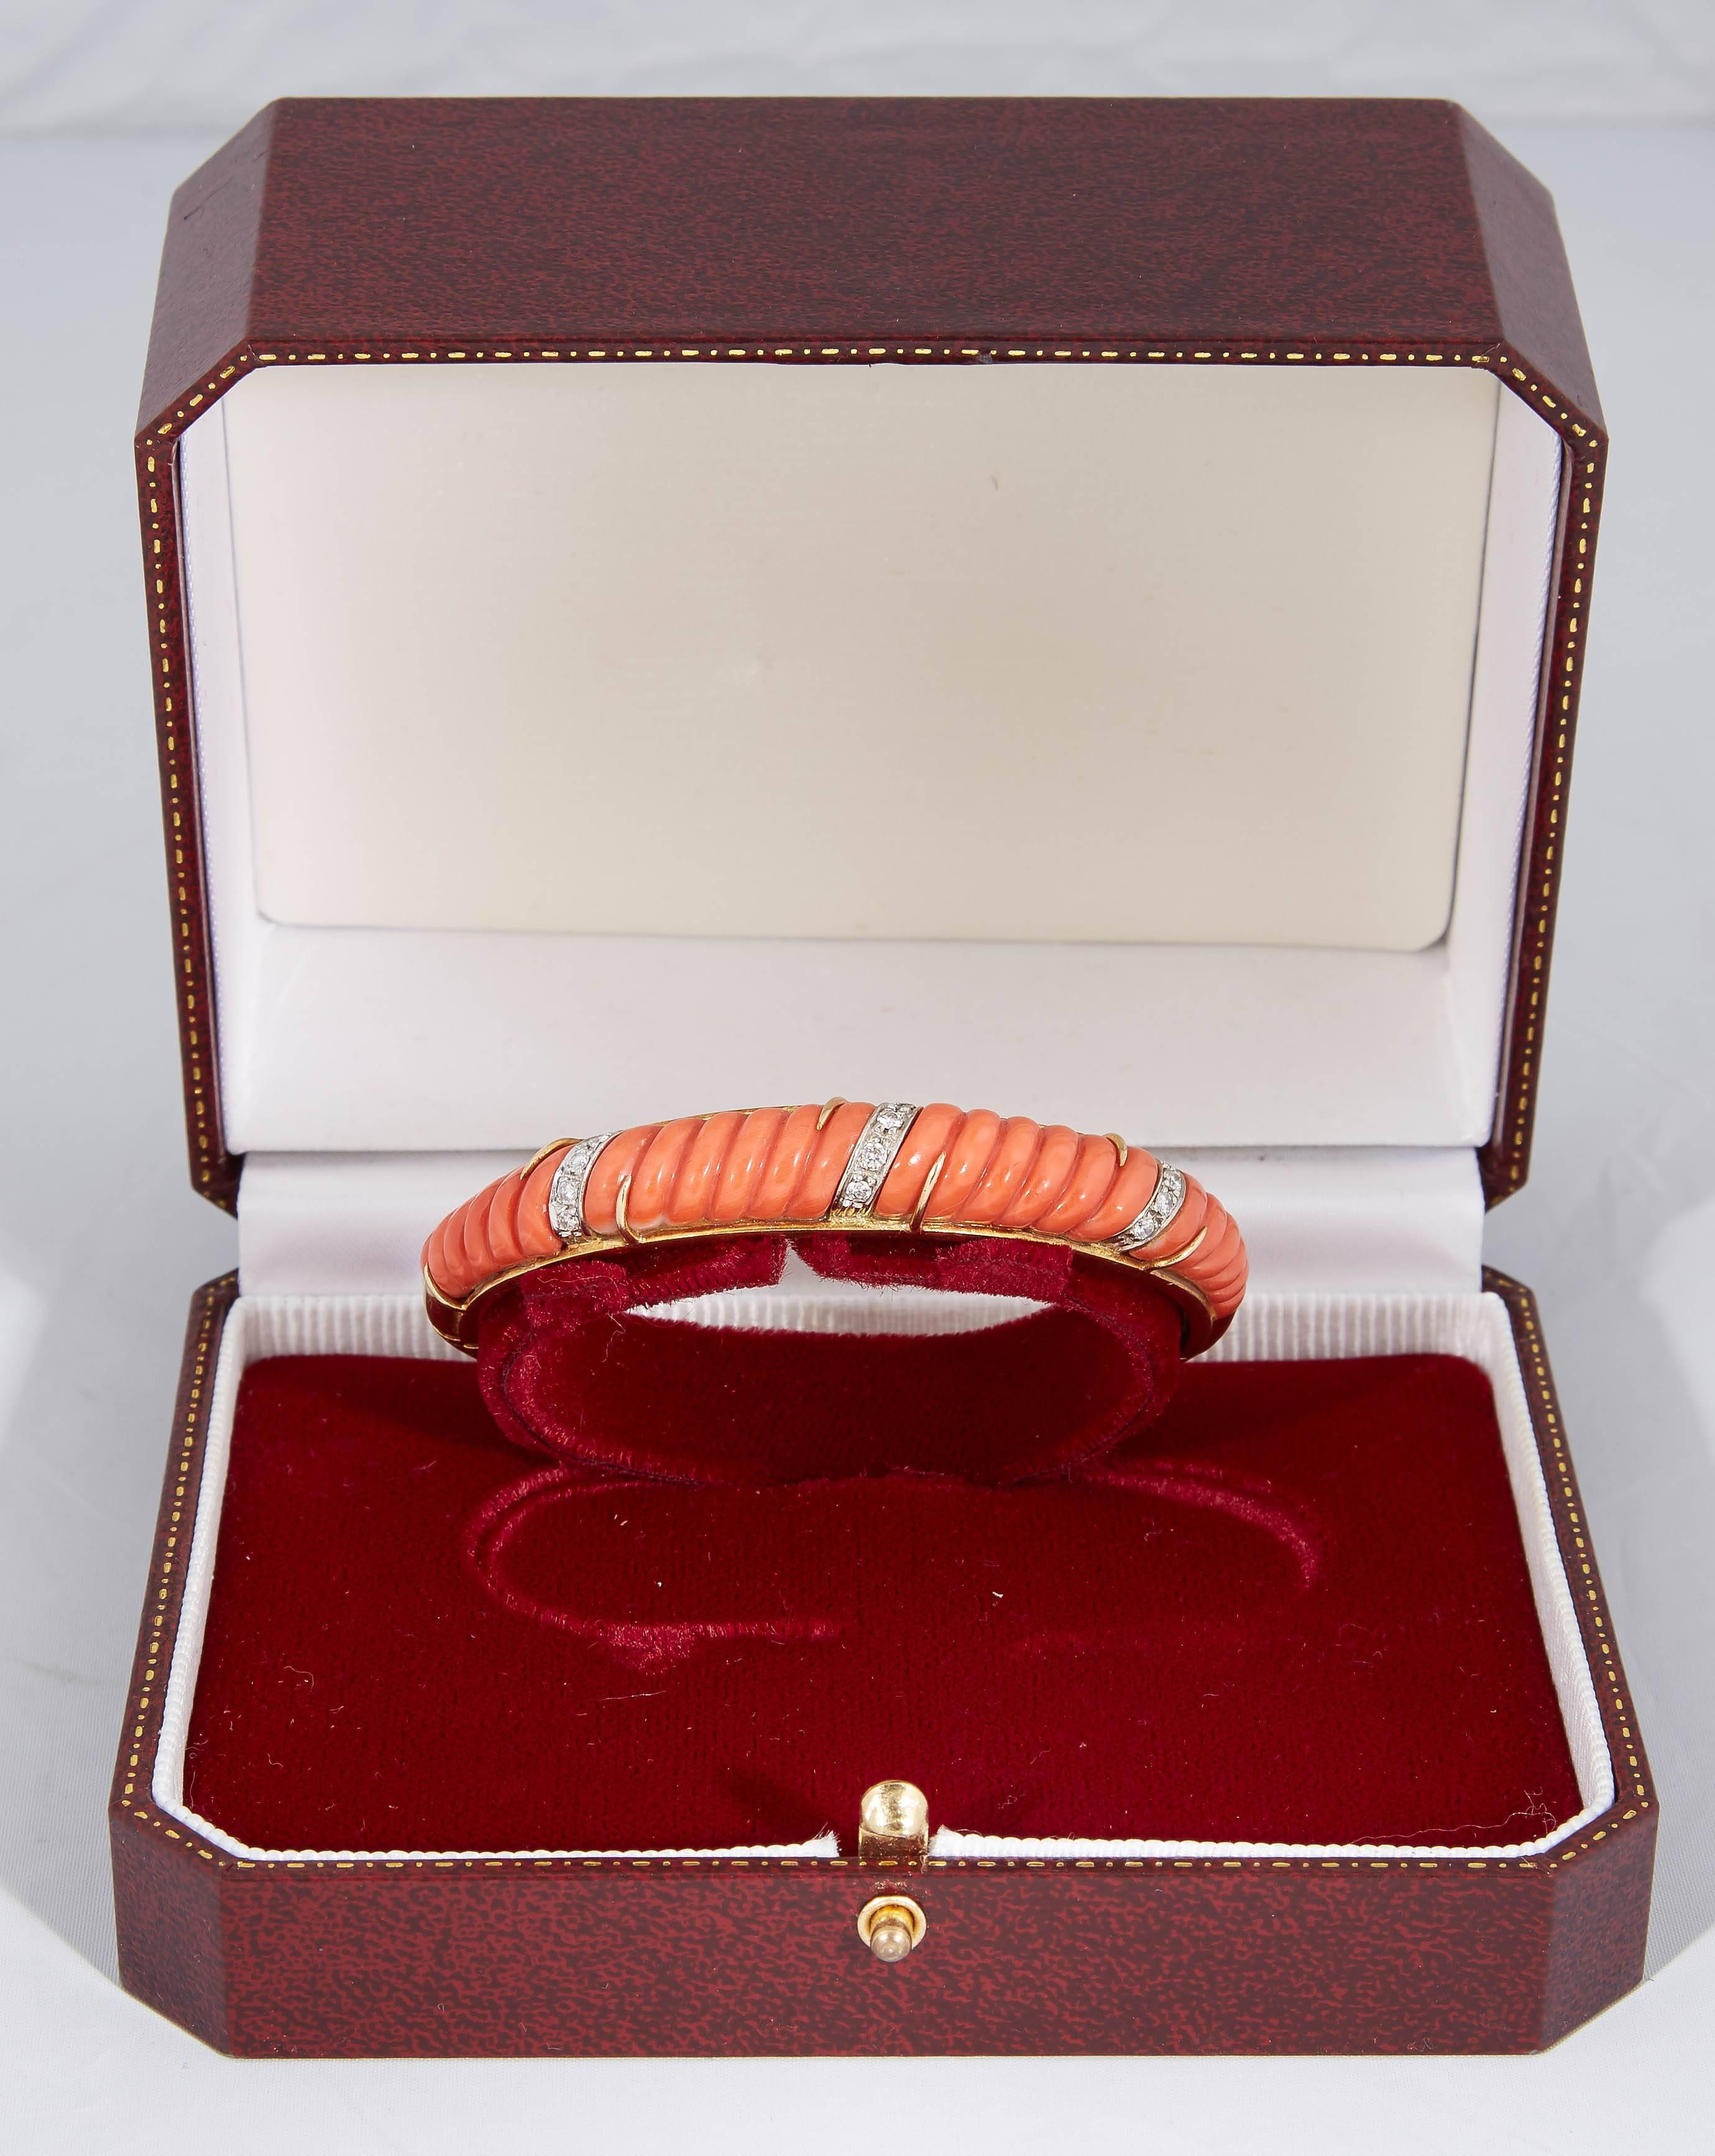 18kt Yellow Gold Bangle Bracelet Designed With One Large Custom Cut Fluted Coral Piece 9 Full Cut Diamonds Weighing Approximately .50 carats . Designed in the 1960's in The United States.